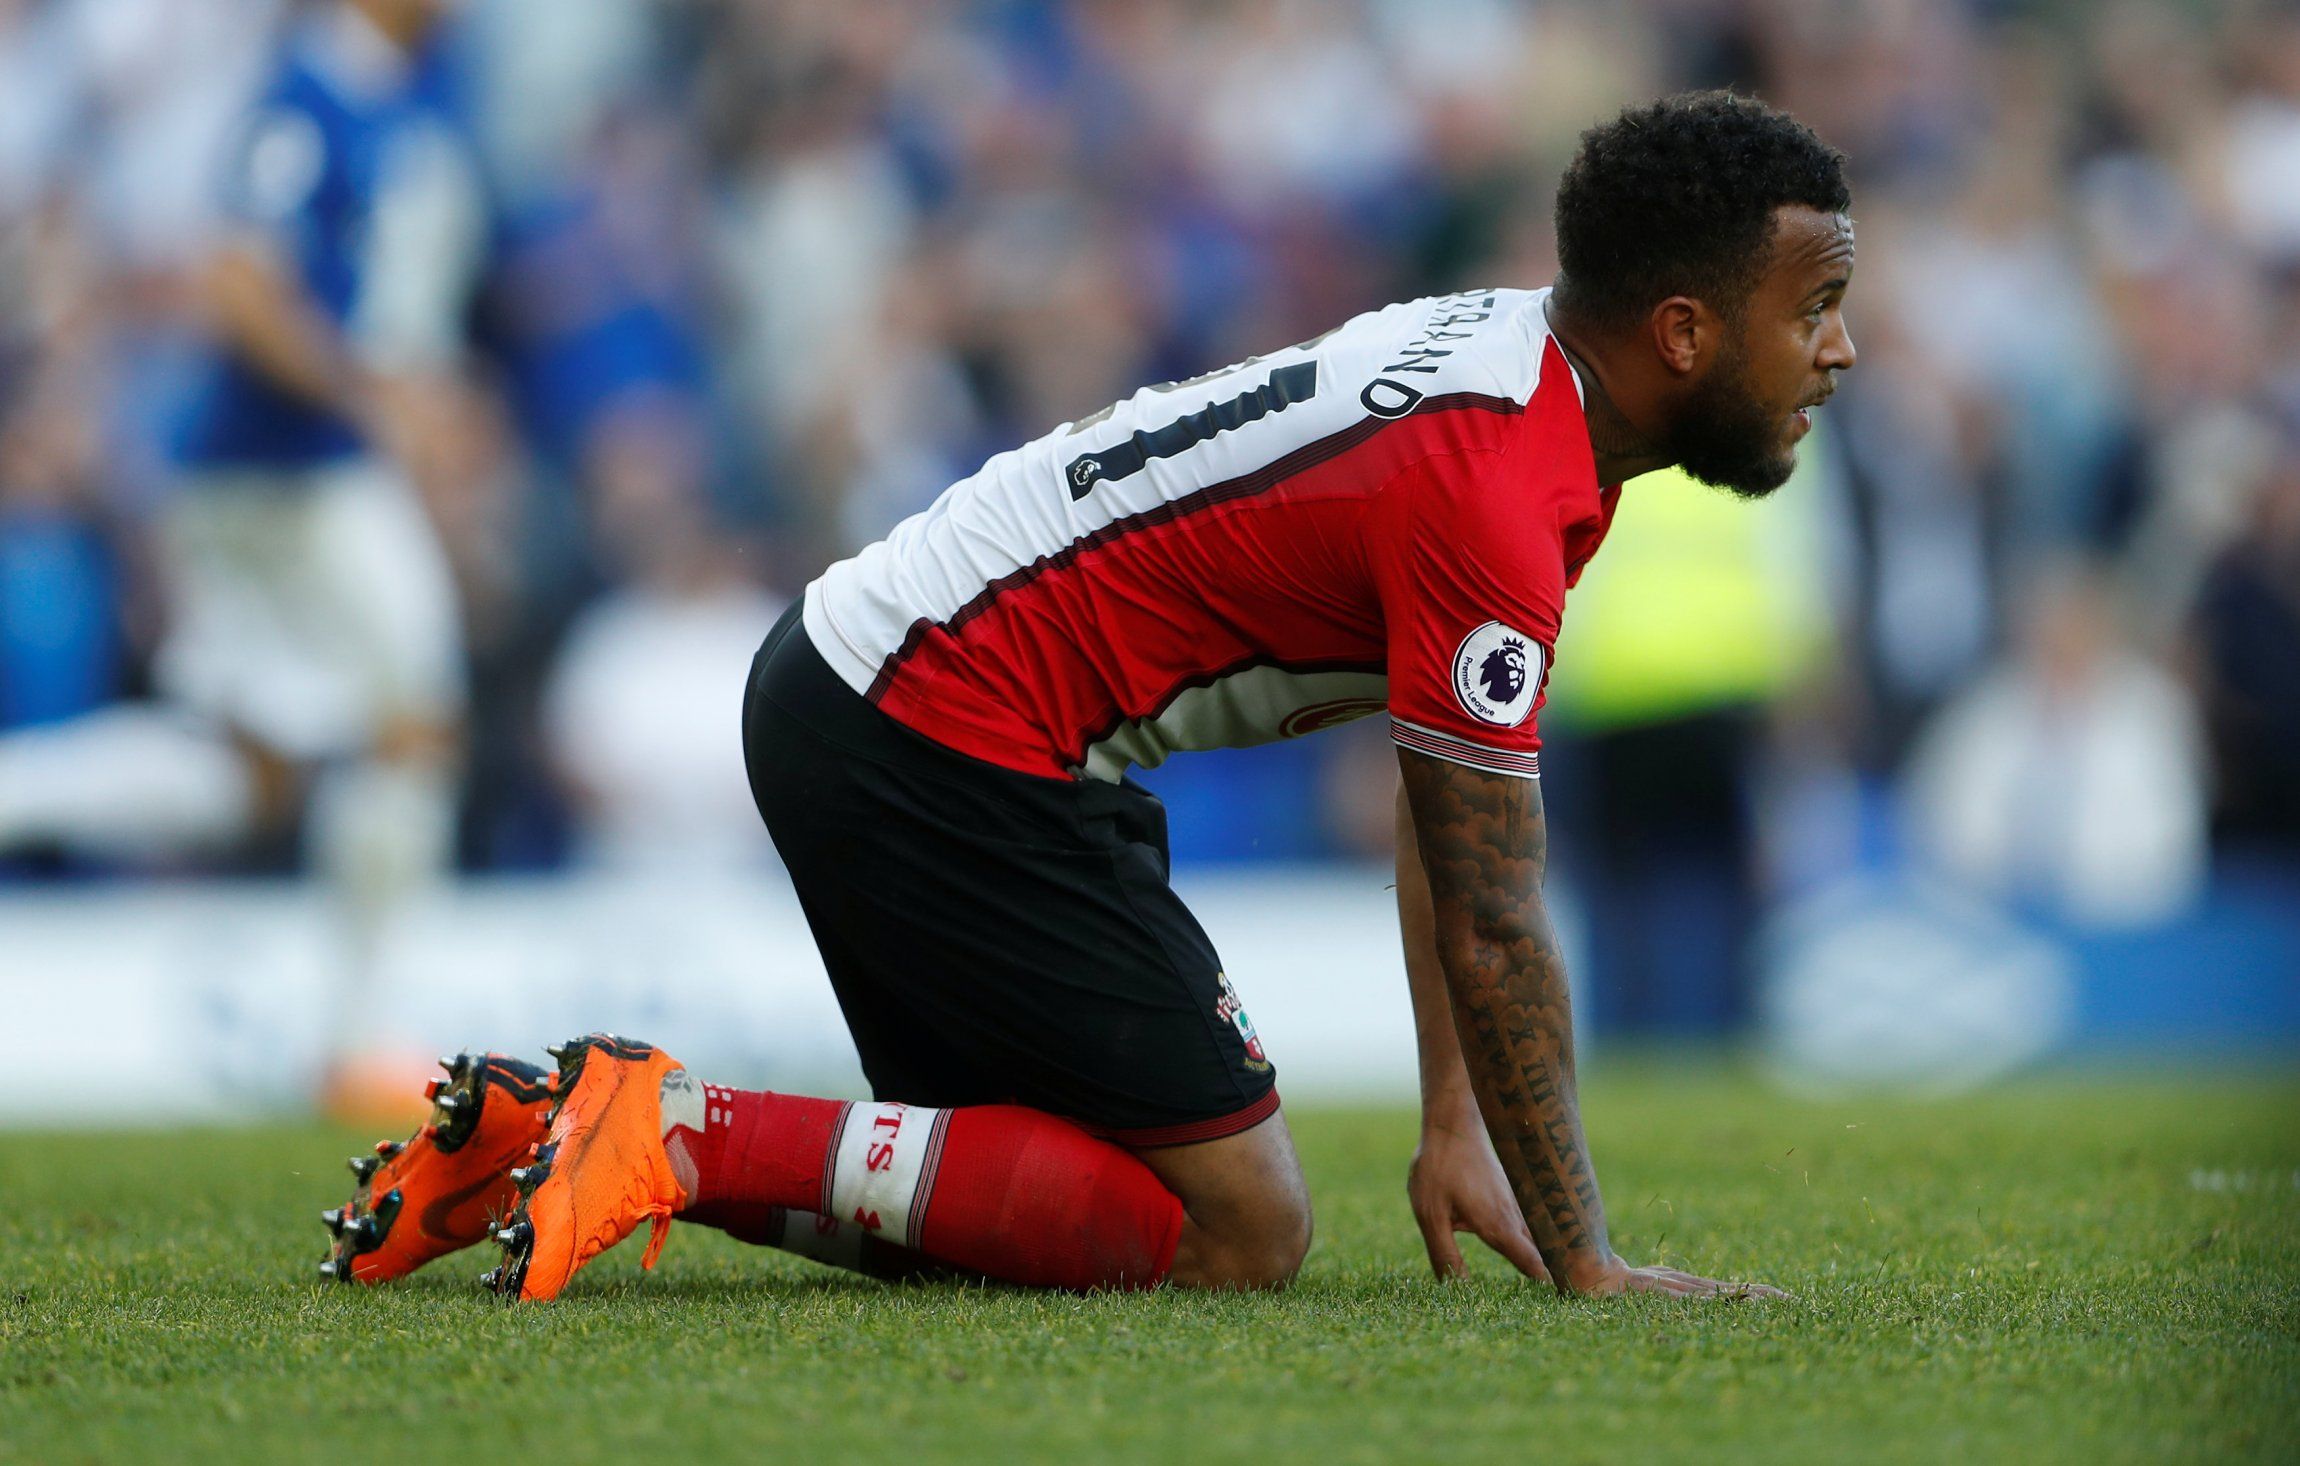 Ryan Bertrand looks dejected after Southampton concede a goal